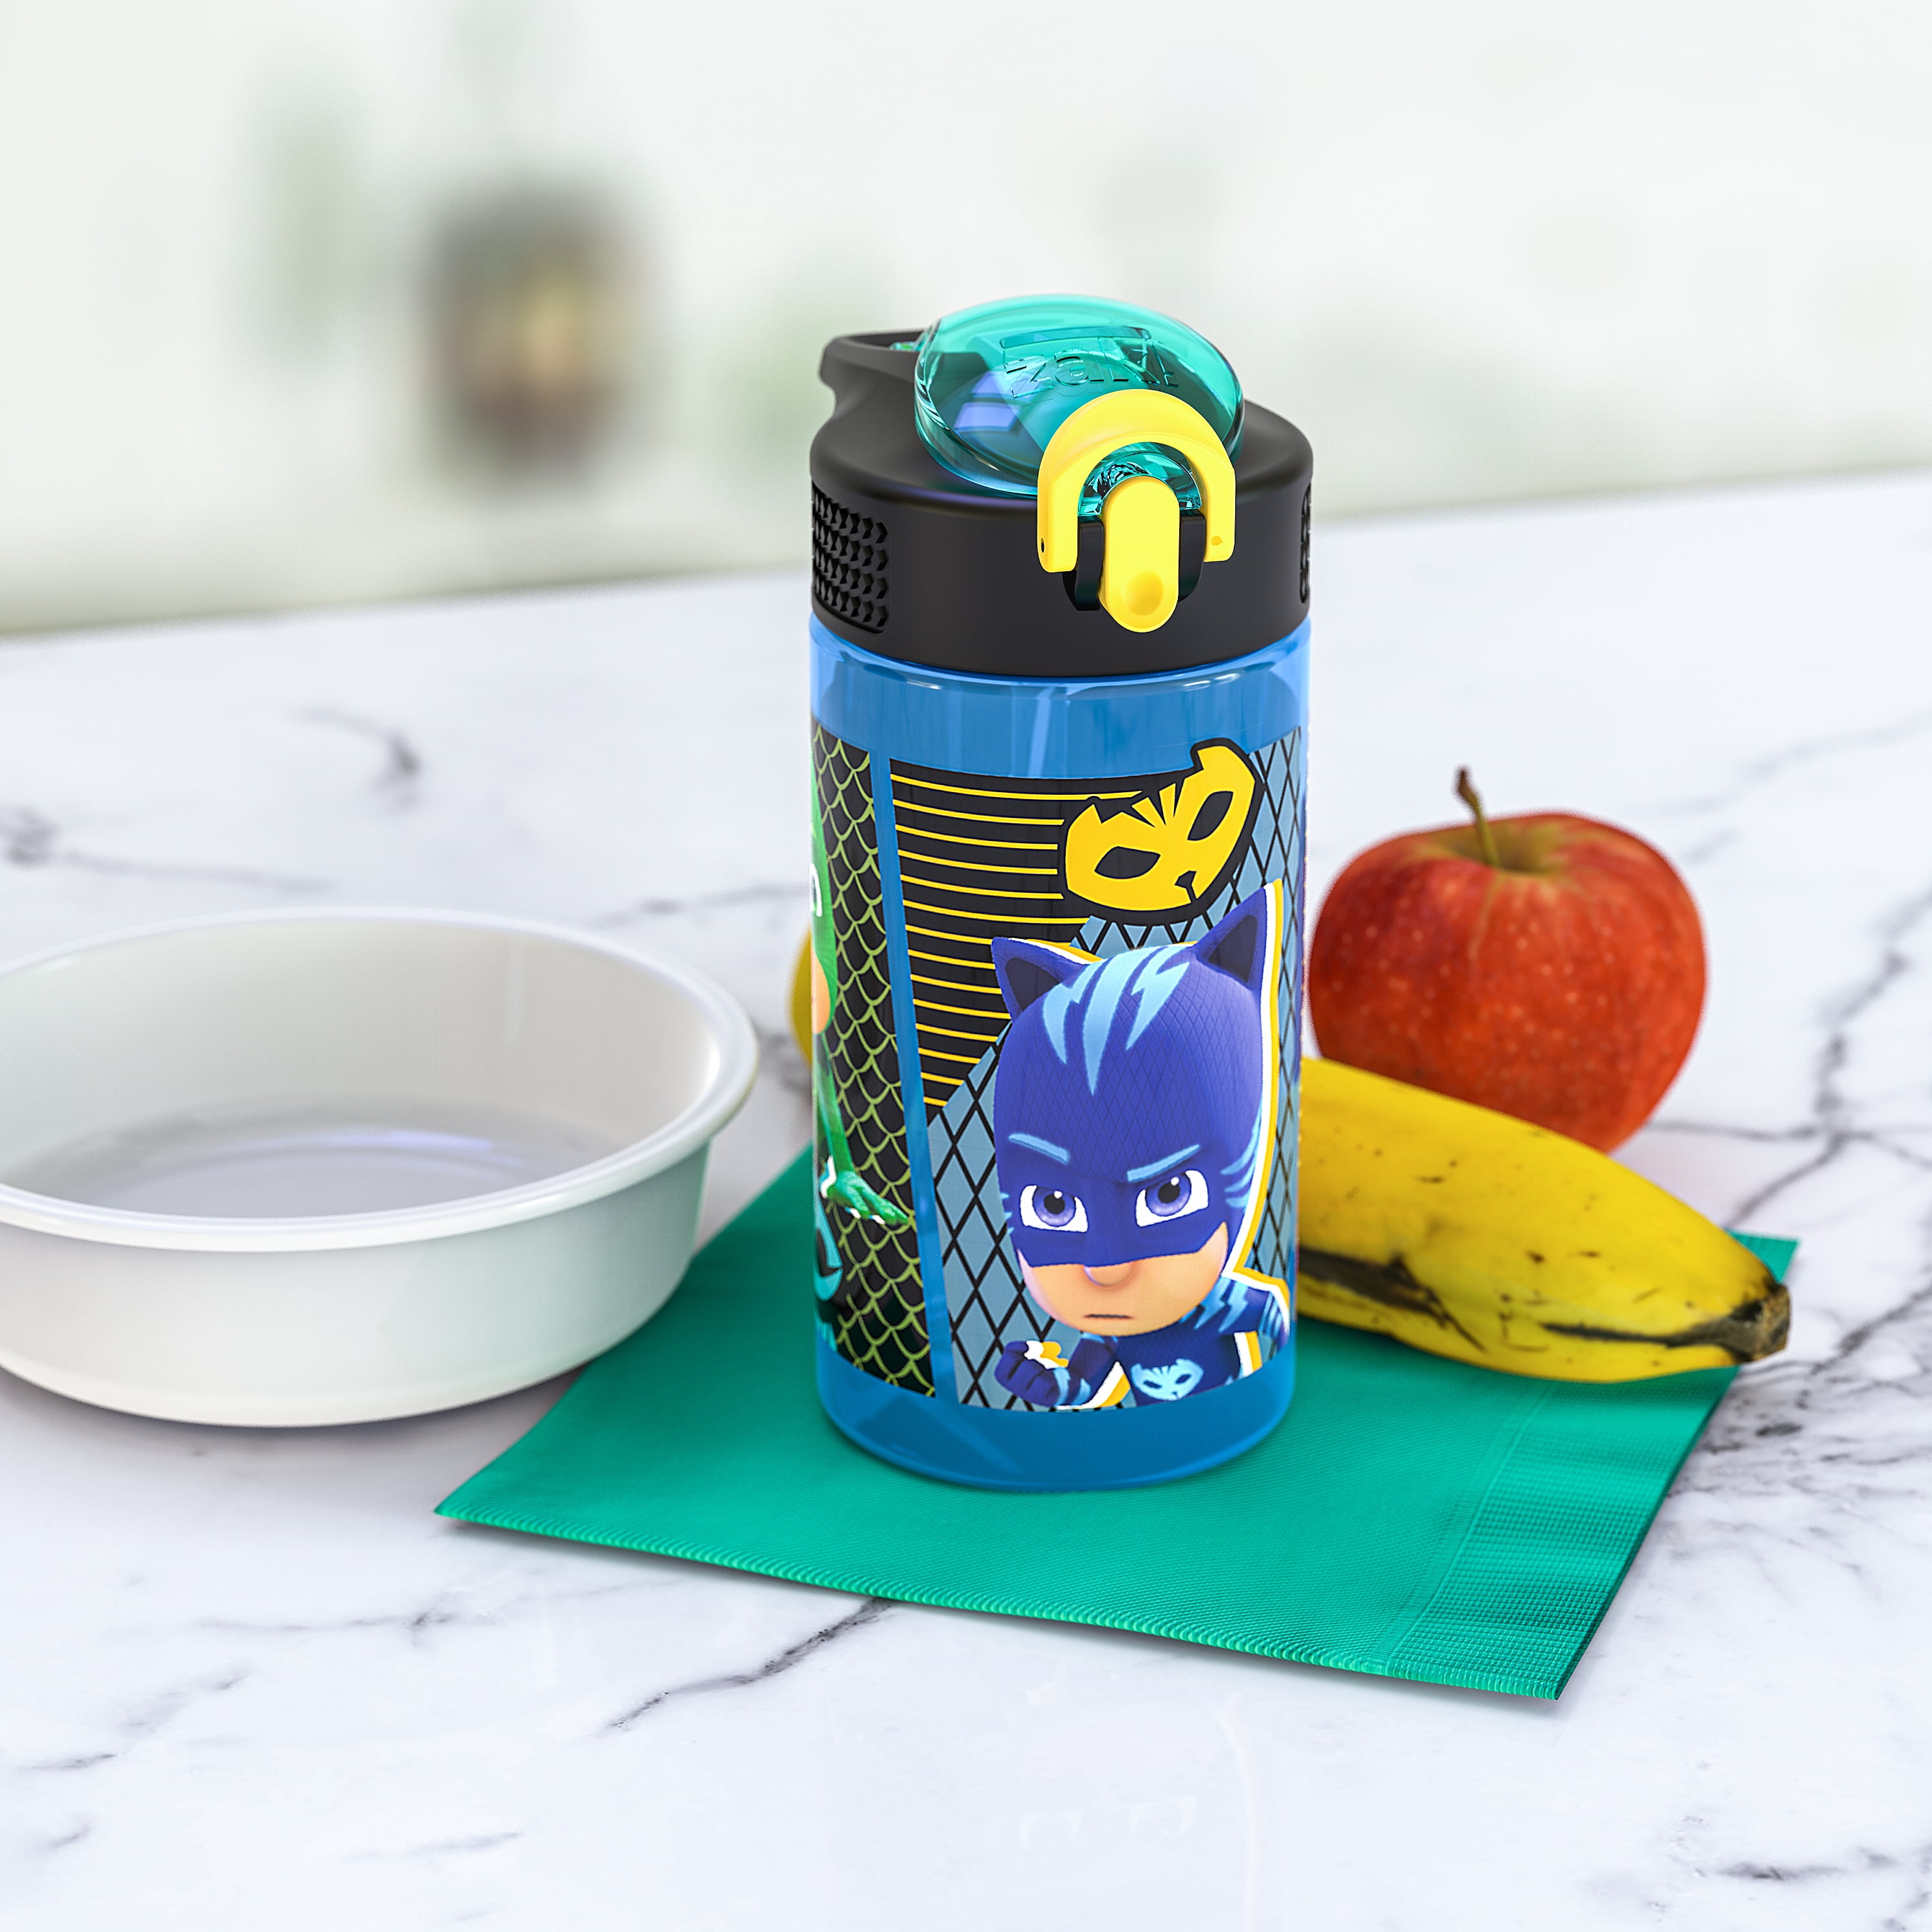 Zak Designs PJ Masks Kids Water Bottle with Spout Cover and Built-In  Carrying Loop, Durable Plastic, Leak-Proof Design for Travel (16 oz,  Non-BPA, Catboy & Owlette & Gekko), multicolor - Coupon Codes